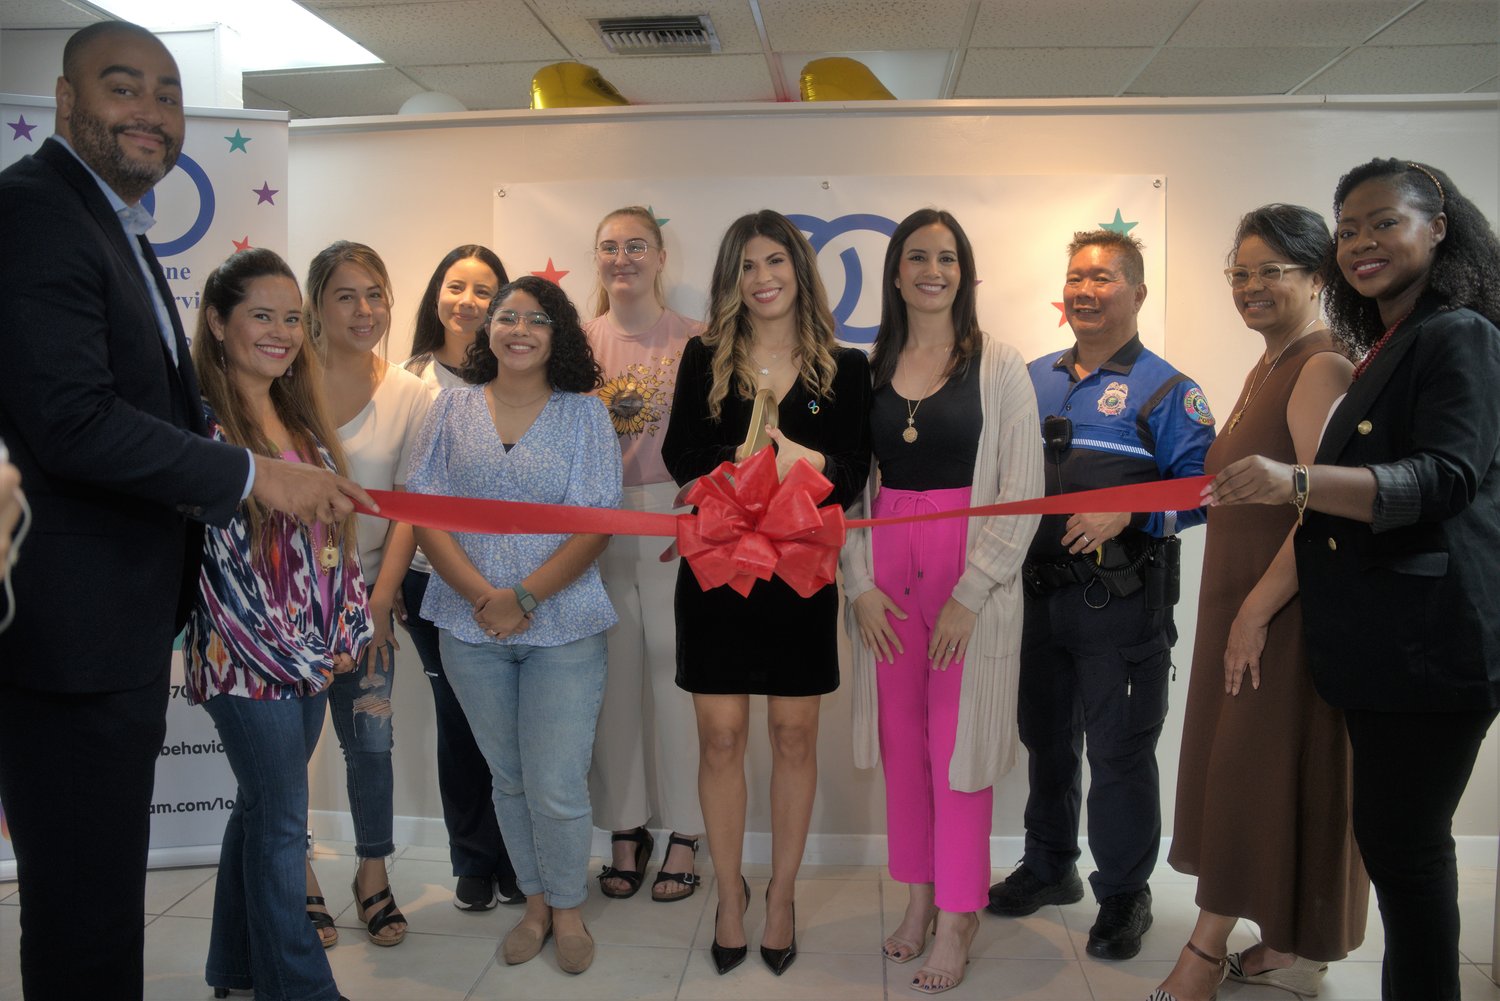 The Grand Opening of Our New Autism Center in Doral!